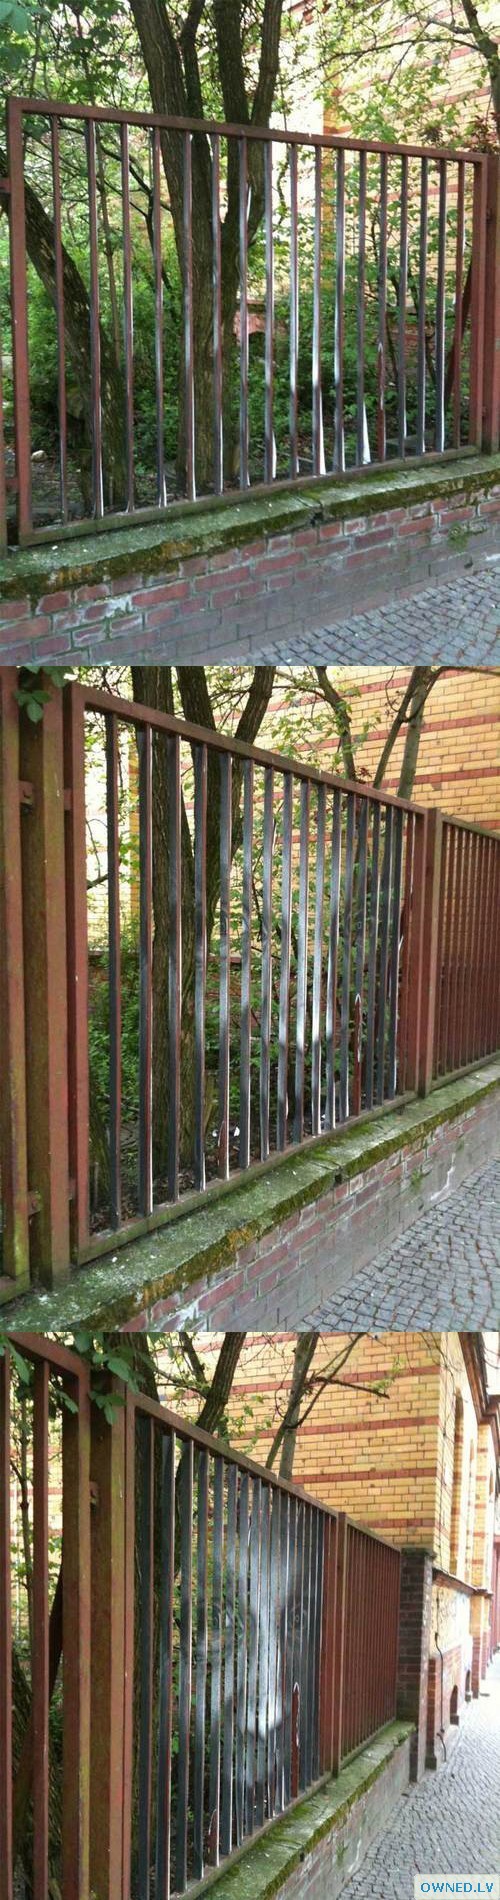 Just A Fence...Wait...OMG